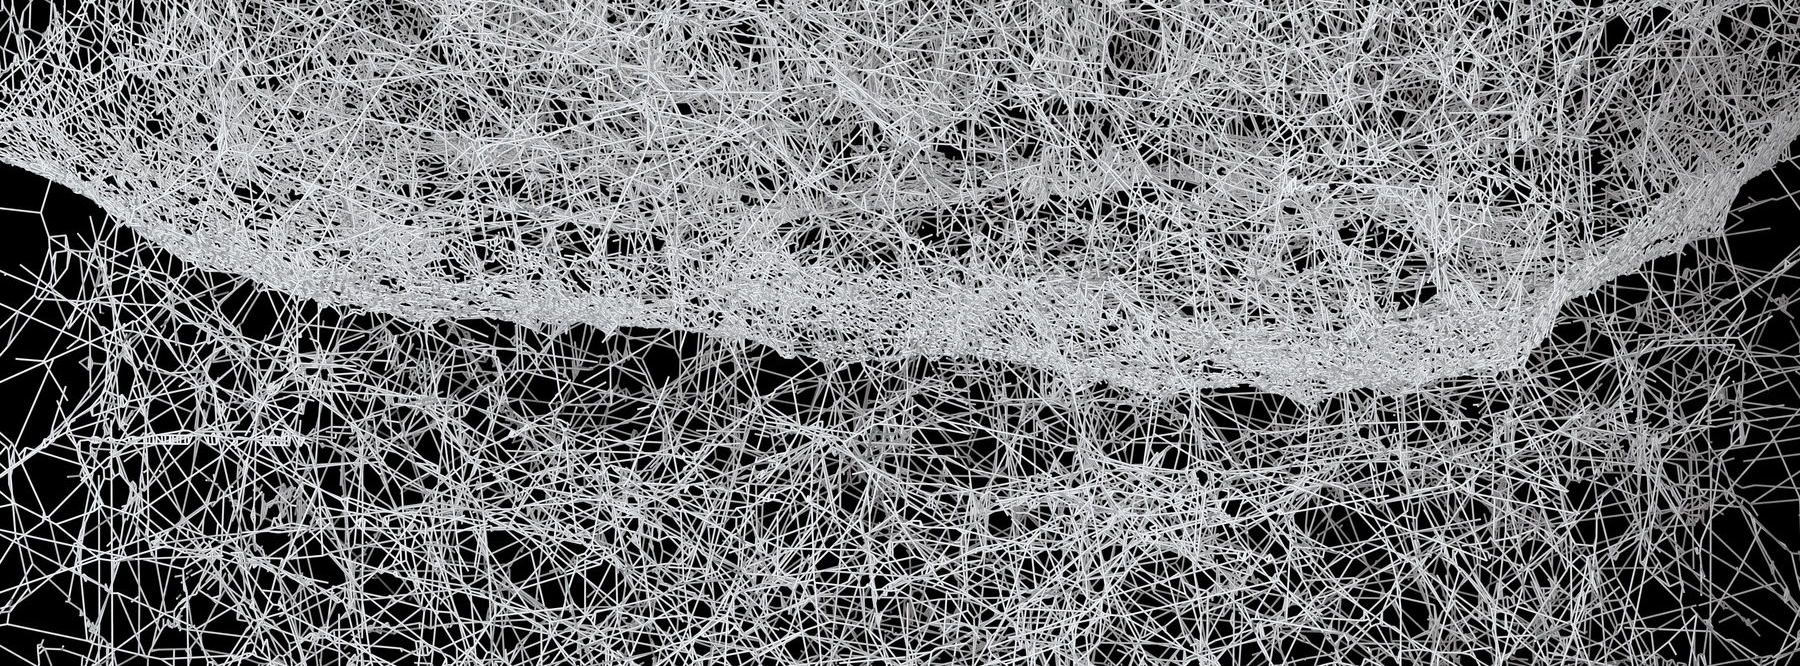 Professor Markus Buehler and his Laboratory for Atomistic and Molecular Mechanics published research that shows the 3D architecture of spider webs